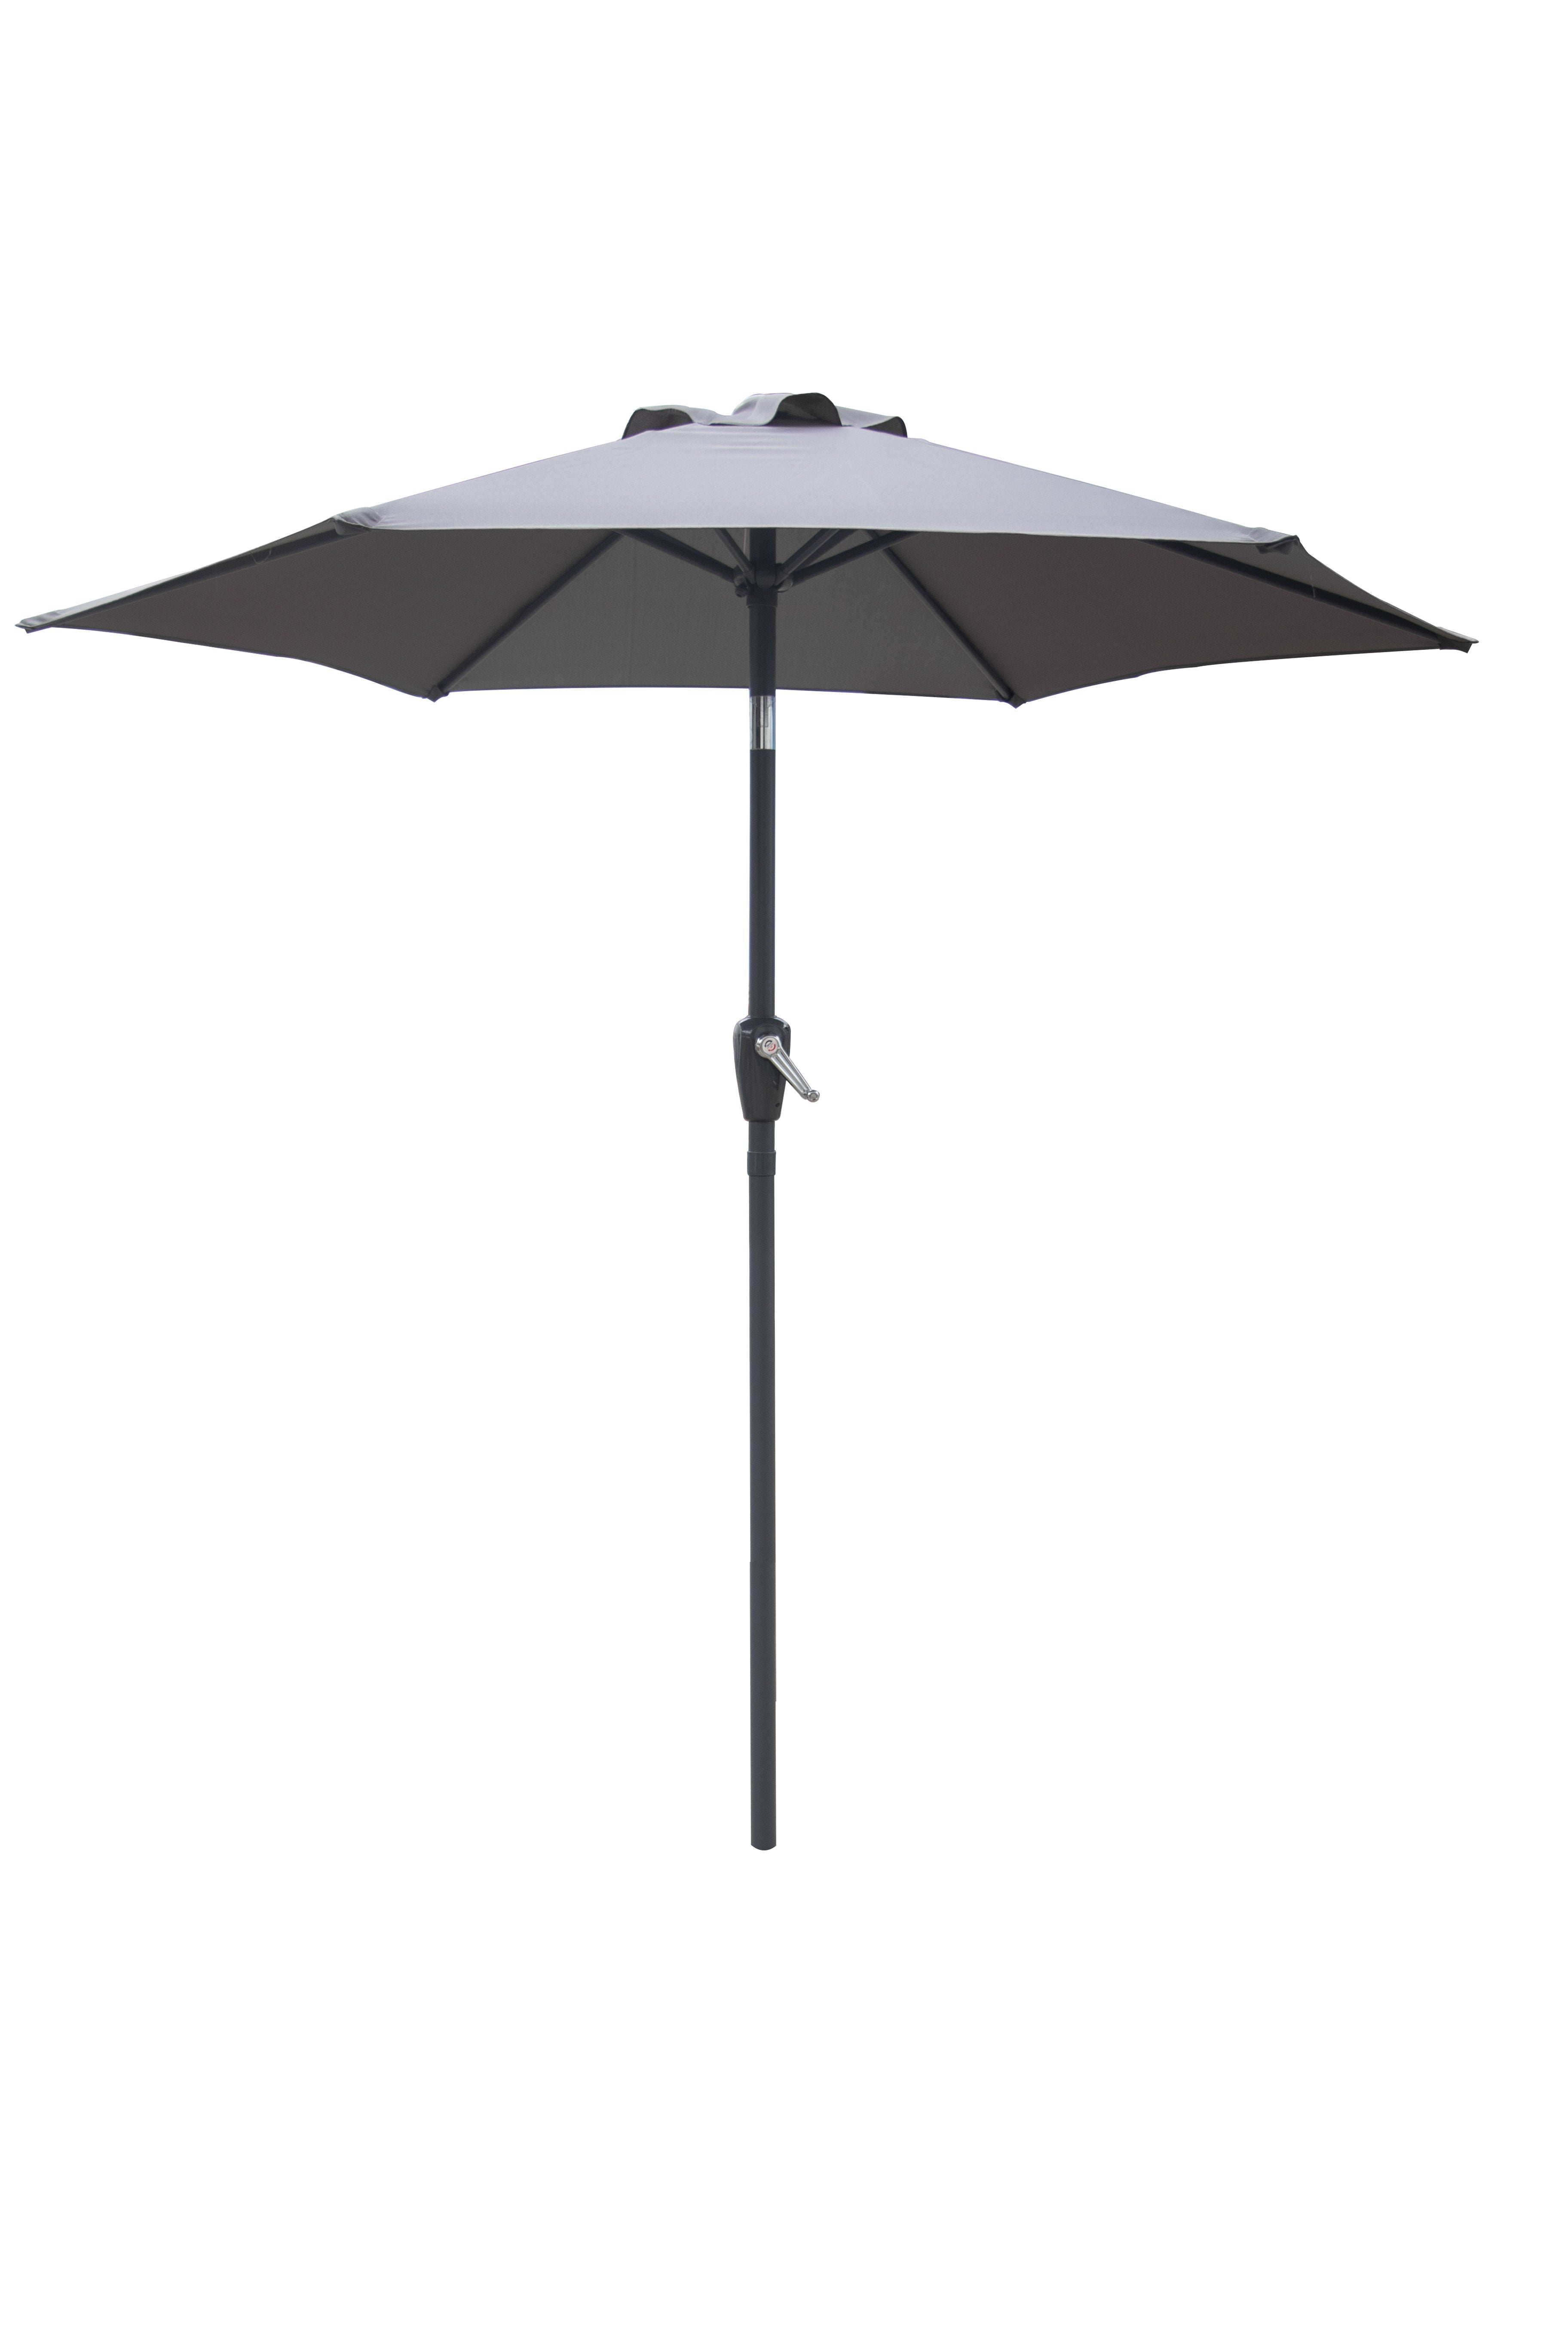 7' Tilting market umbrella, w/out base, cover included BLACK